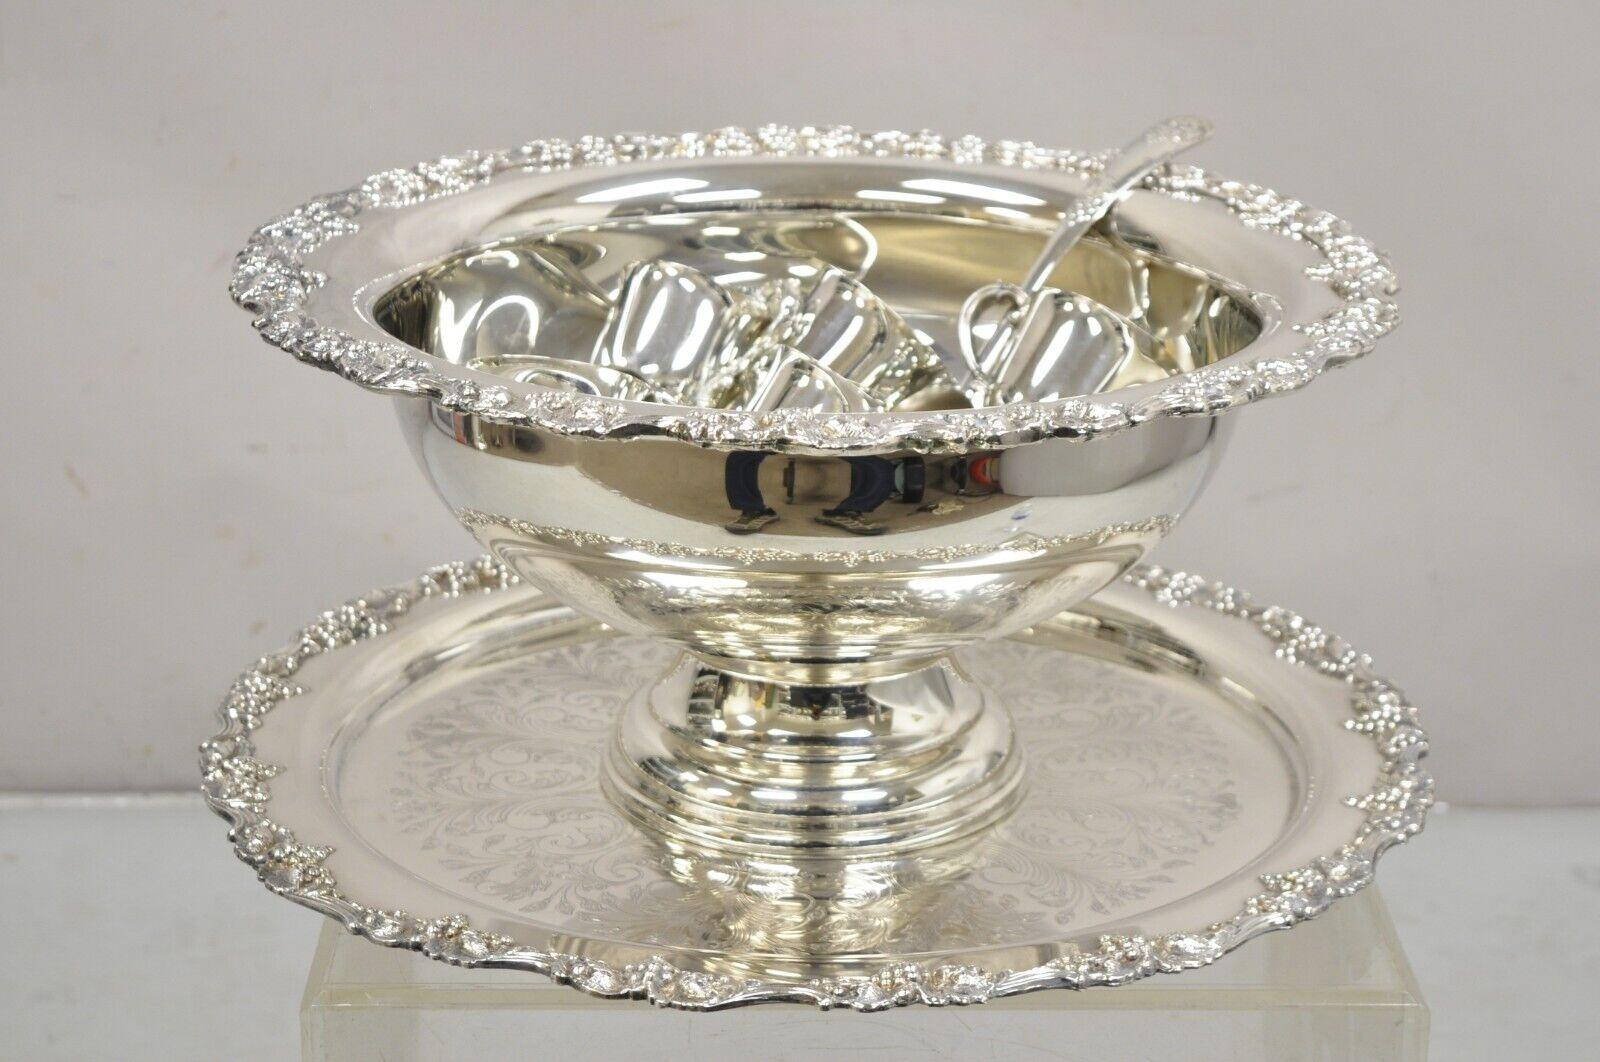 Vintage Victorian Style Silver Plated Punch Bowl Tray Set with 12 Cups - 15 pcs. Item features a grapevine pattern, 12 cups, round ornate tray/platter, large pedestal punch bowl, 1 ladle spoon, very nice vintage set. Circa Late 20th